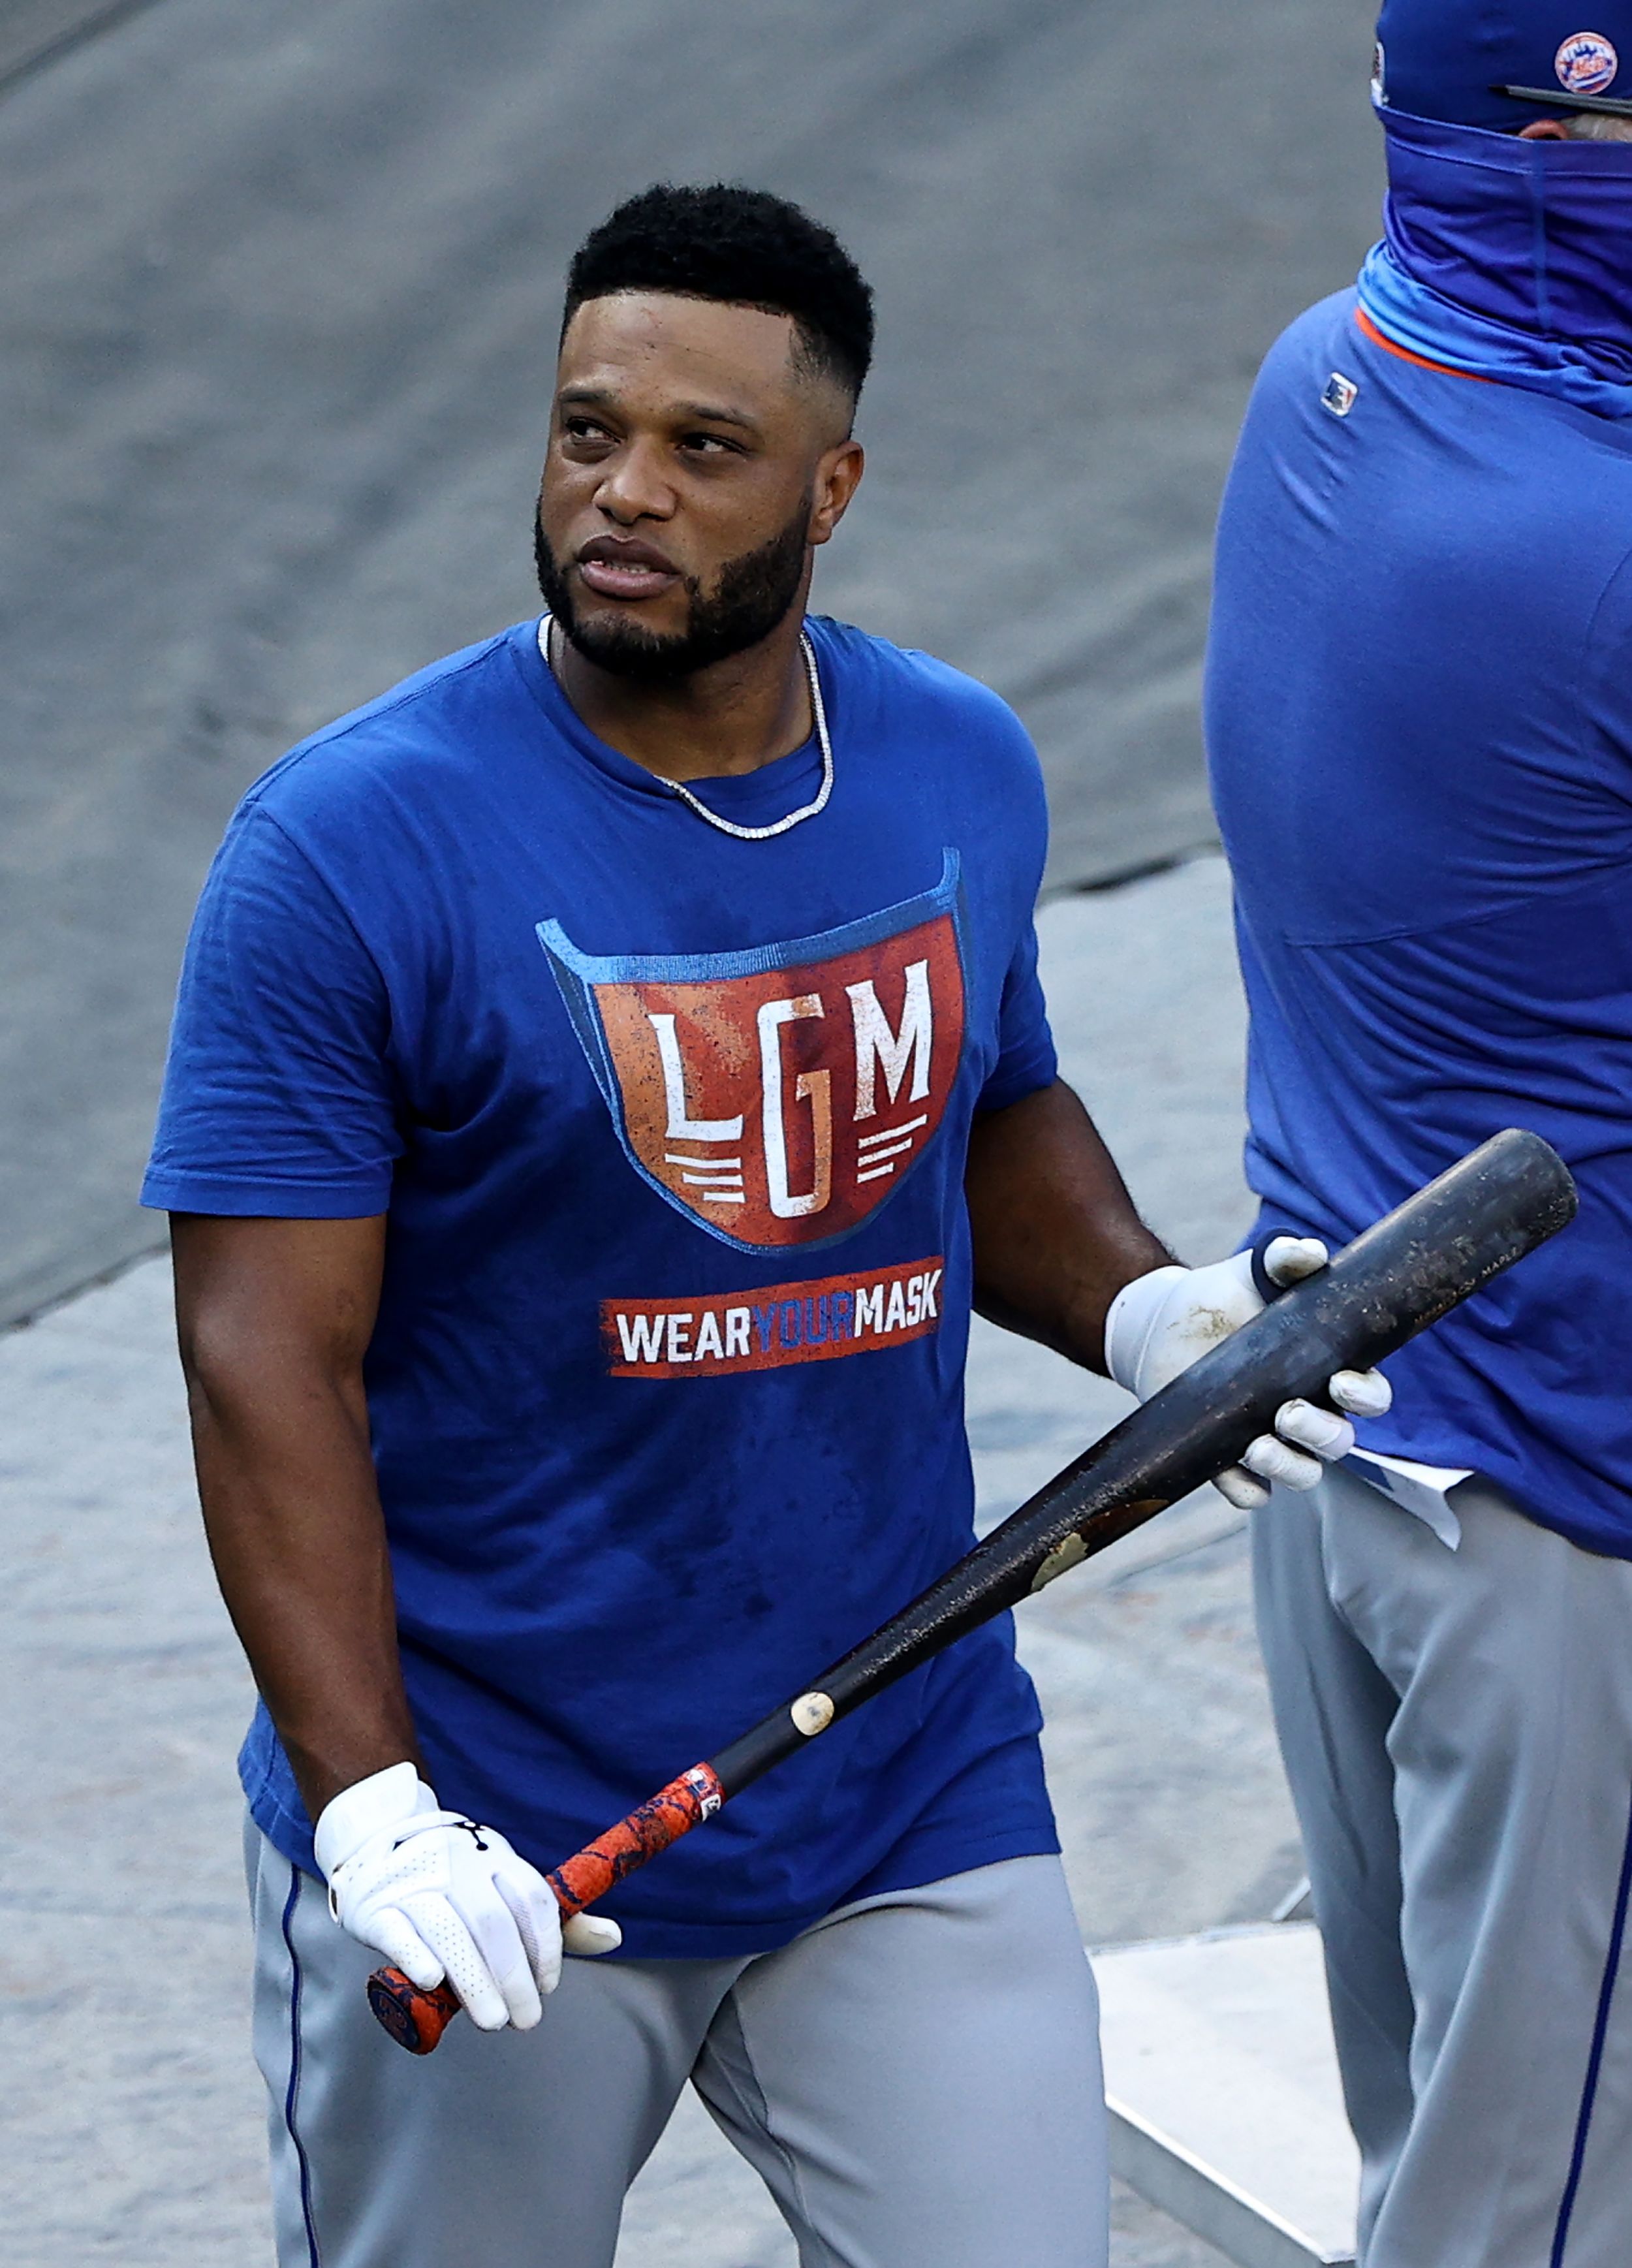 Robinson Cano suspension caps sad ending to tenure with Mets, Yankees